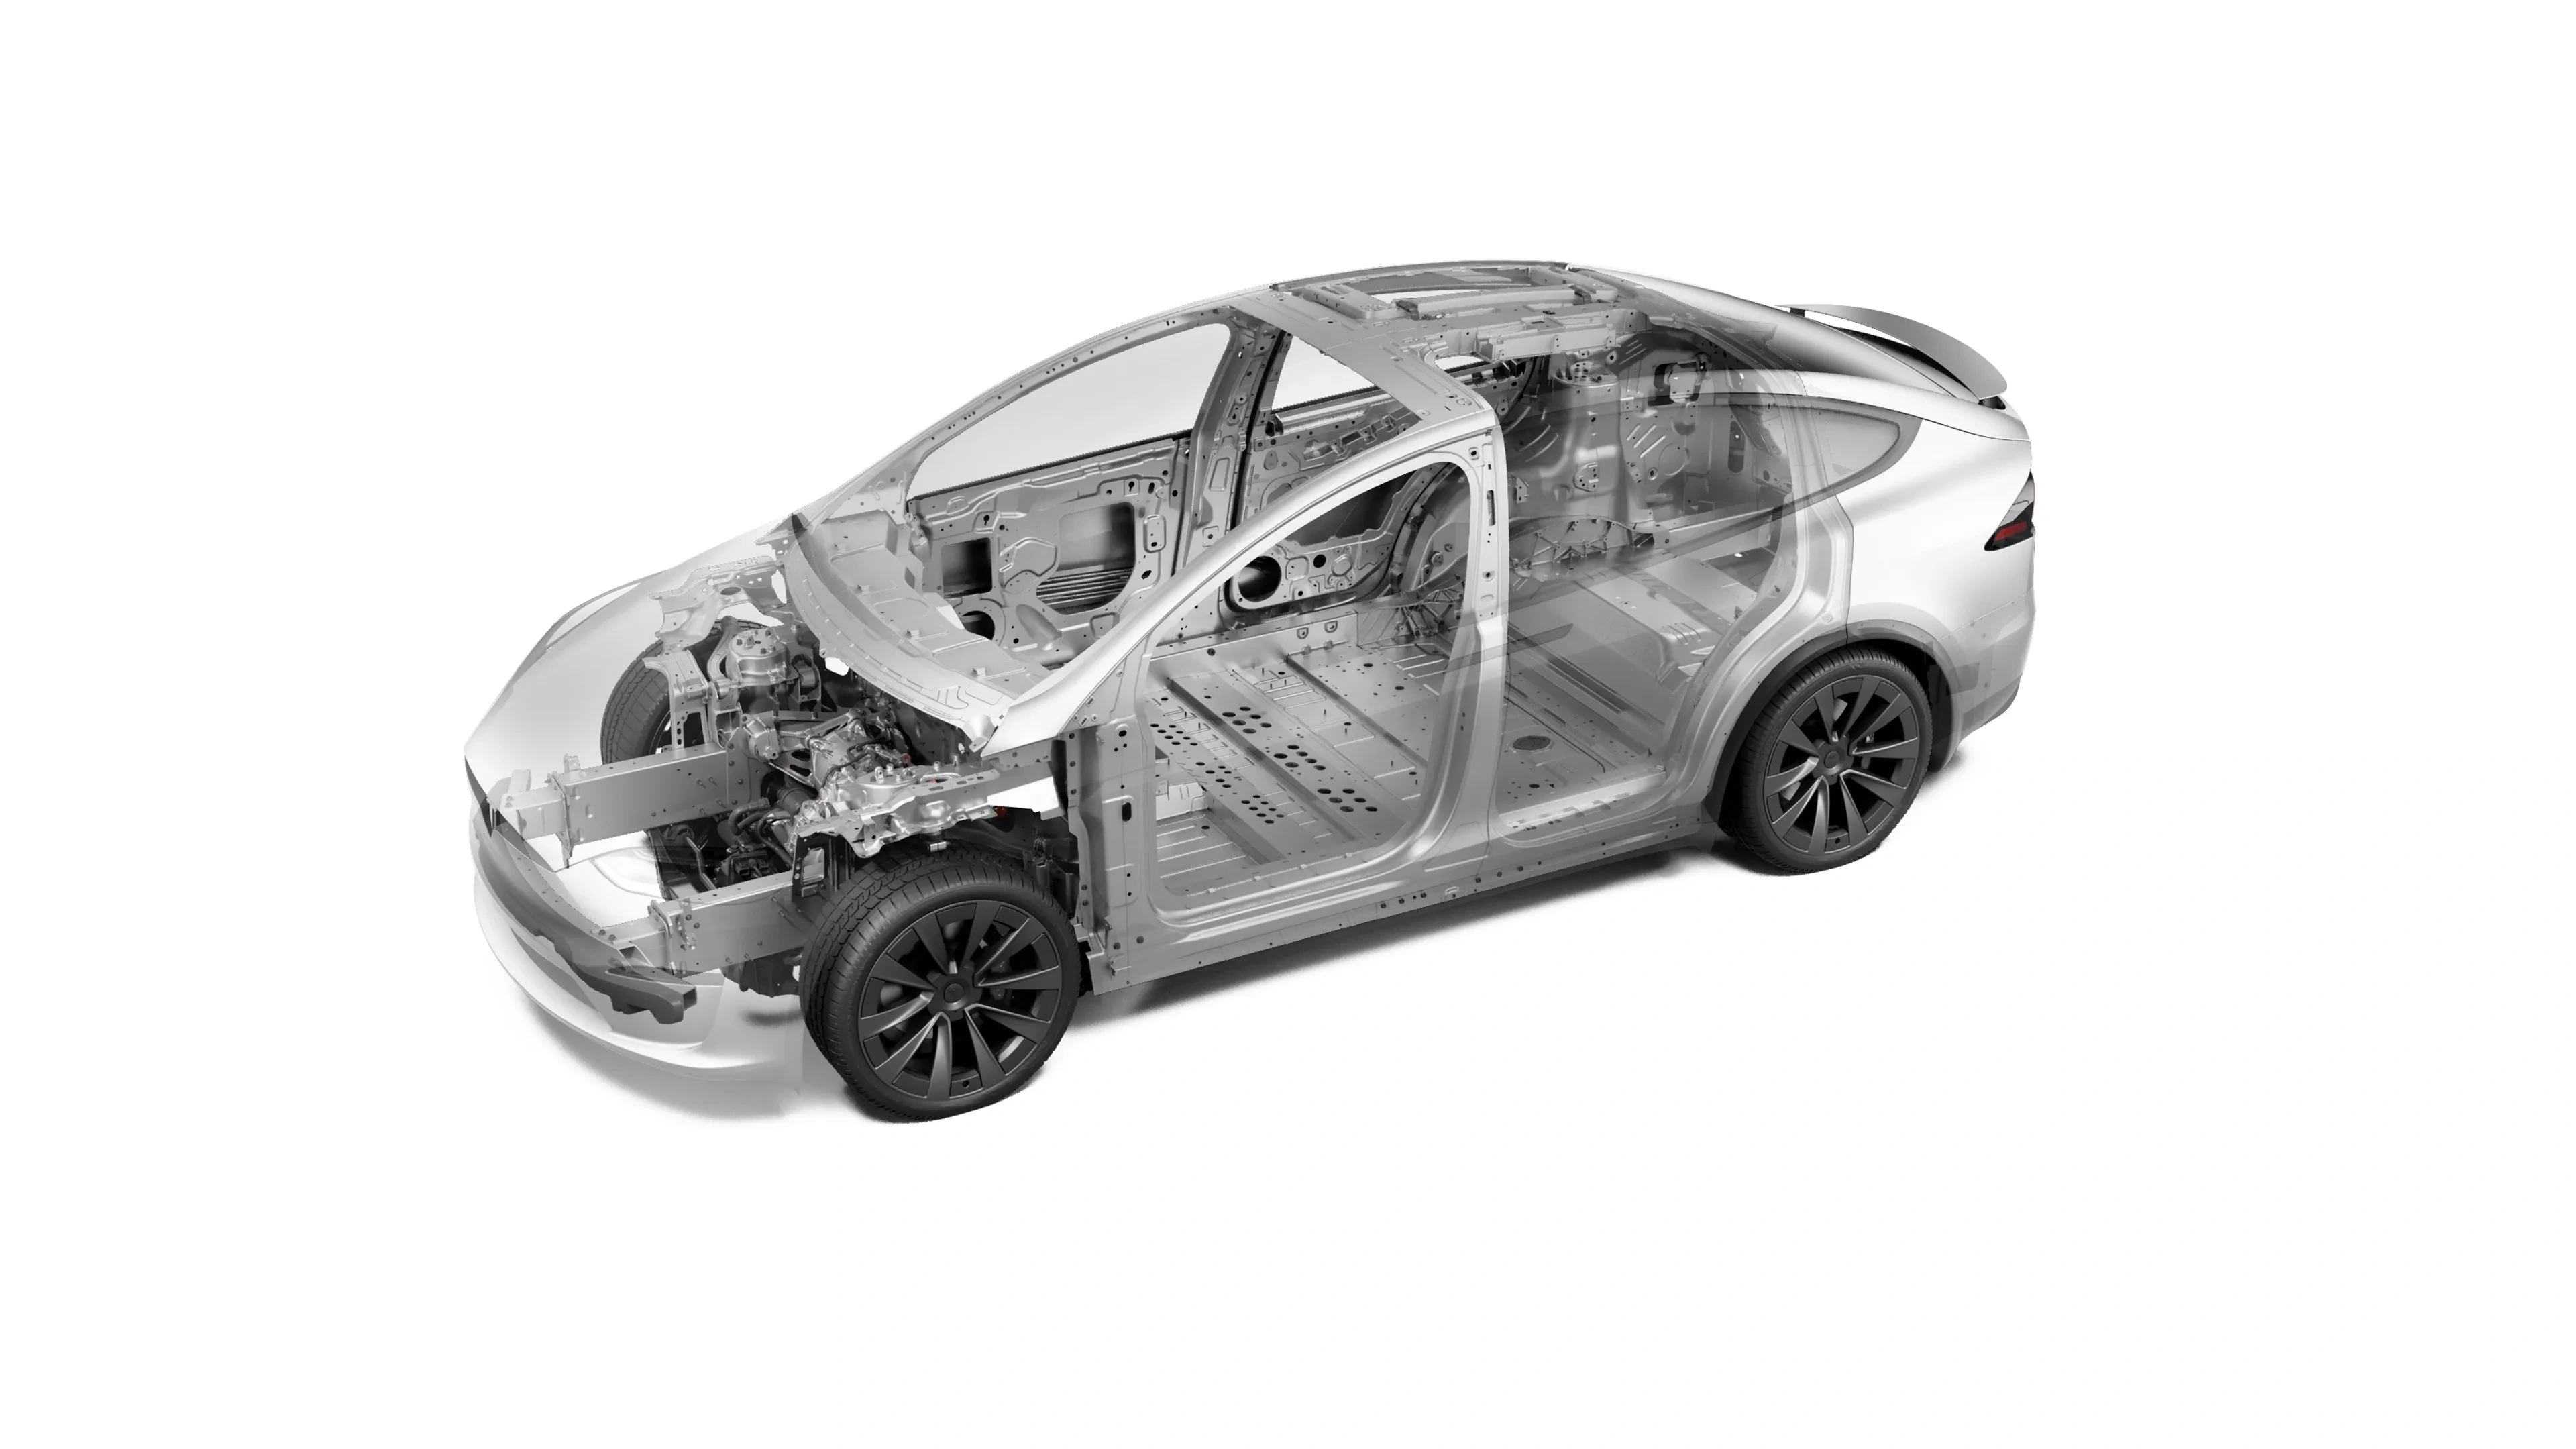 Chassis of Model X